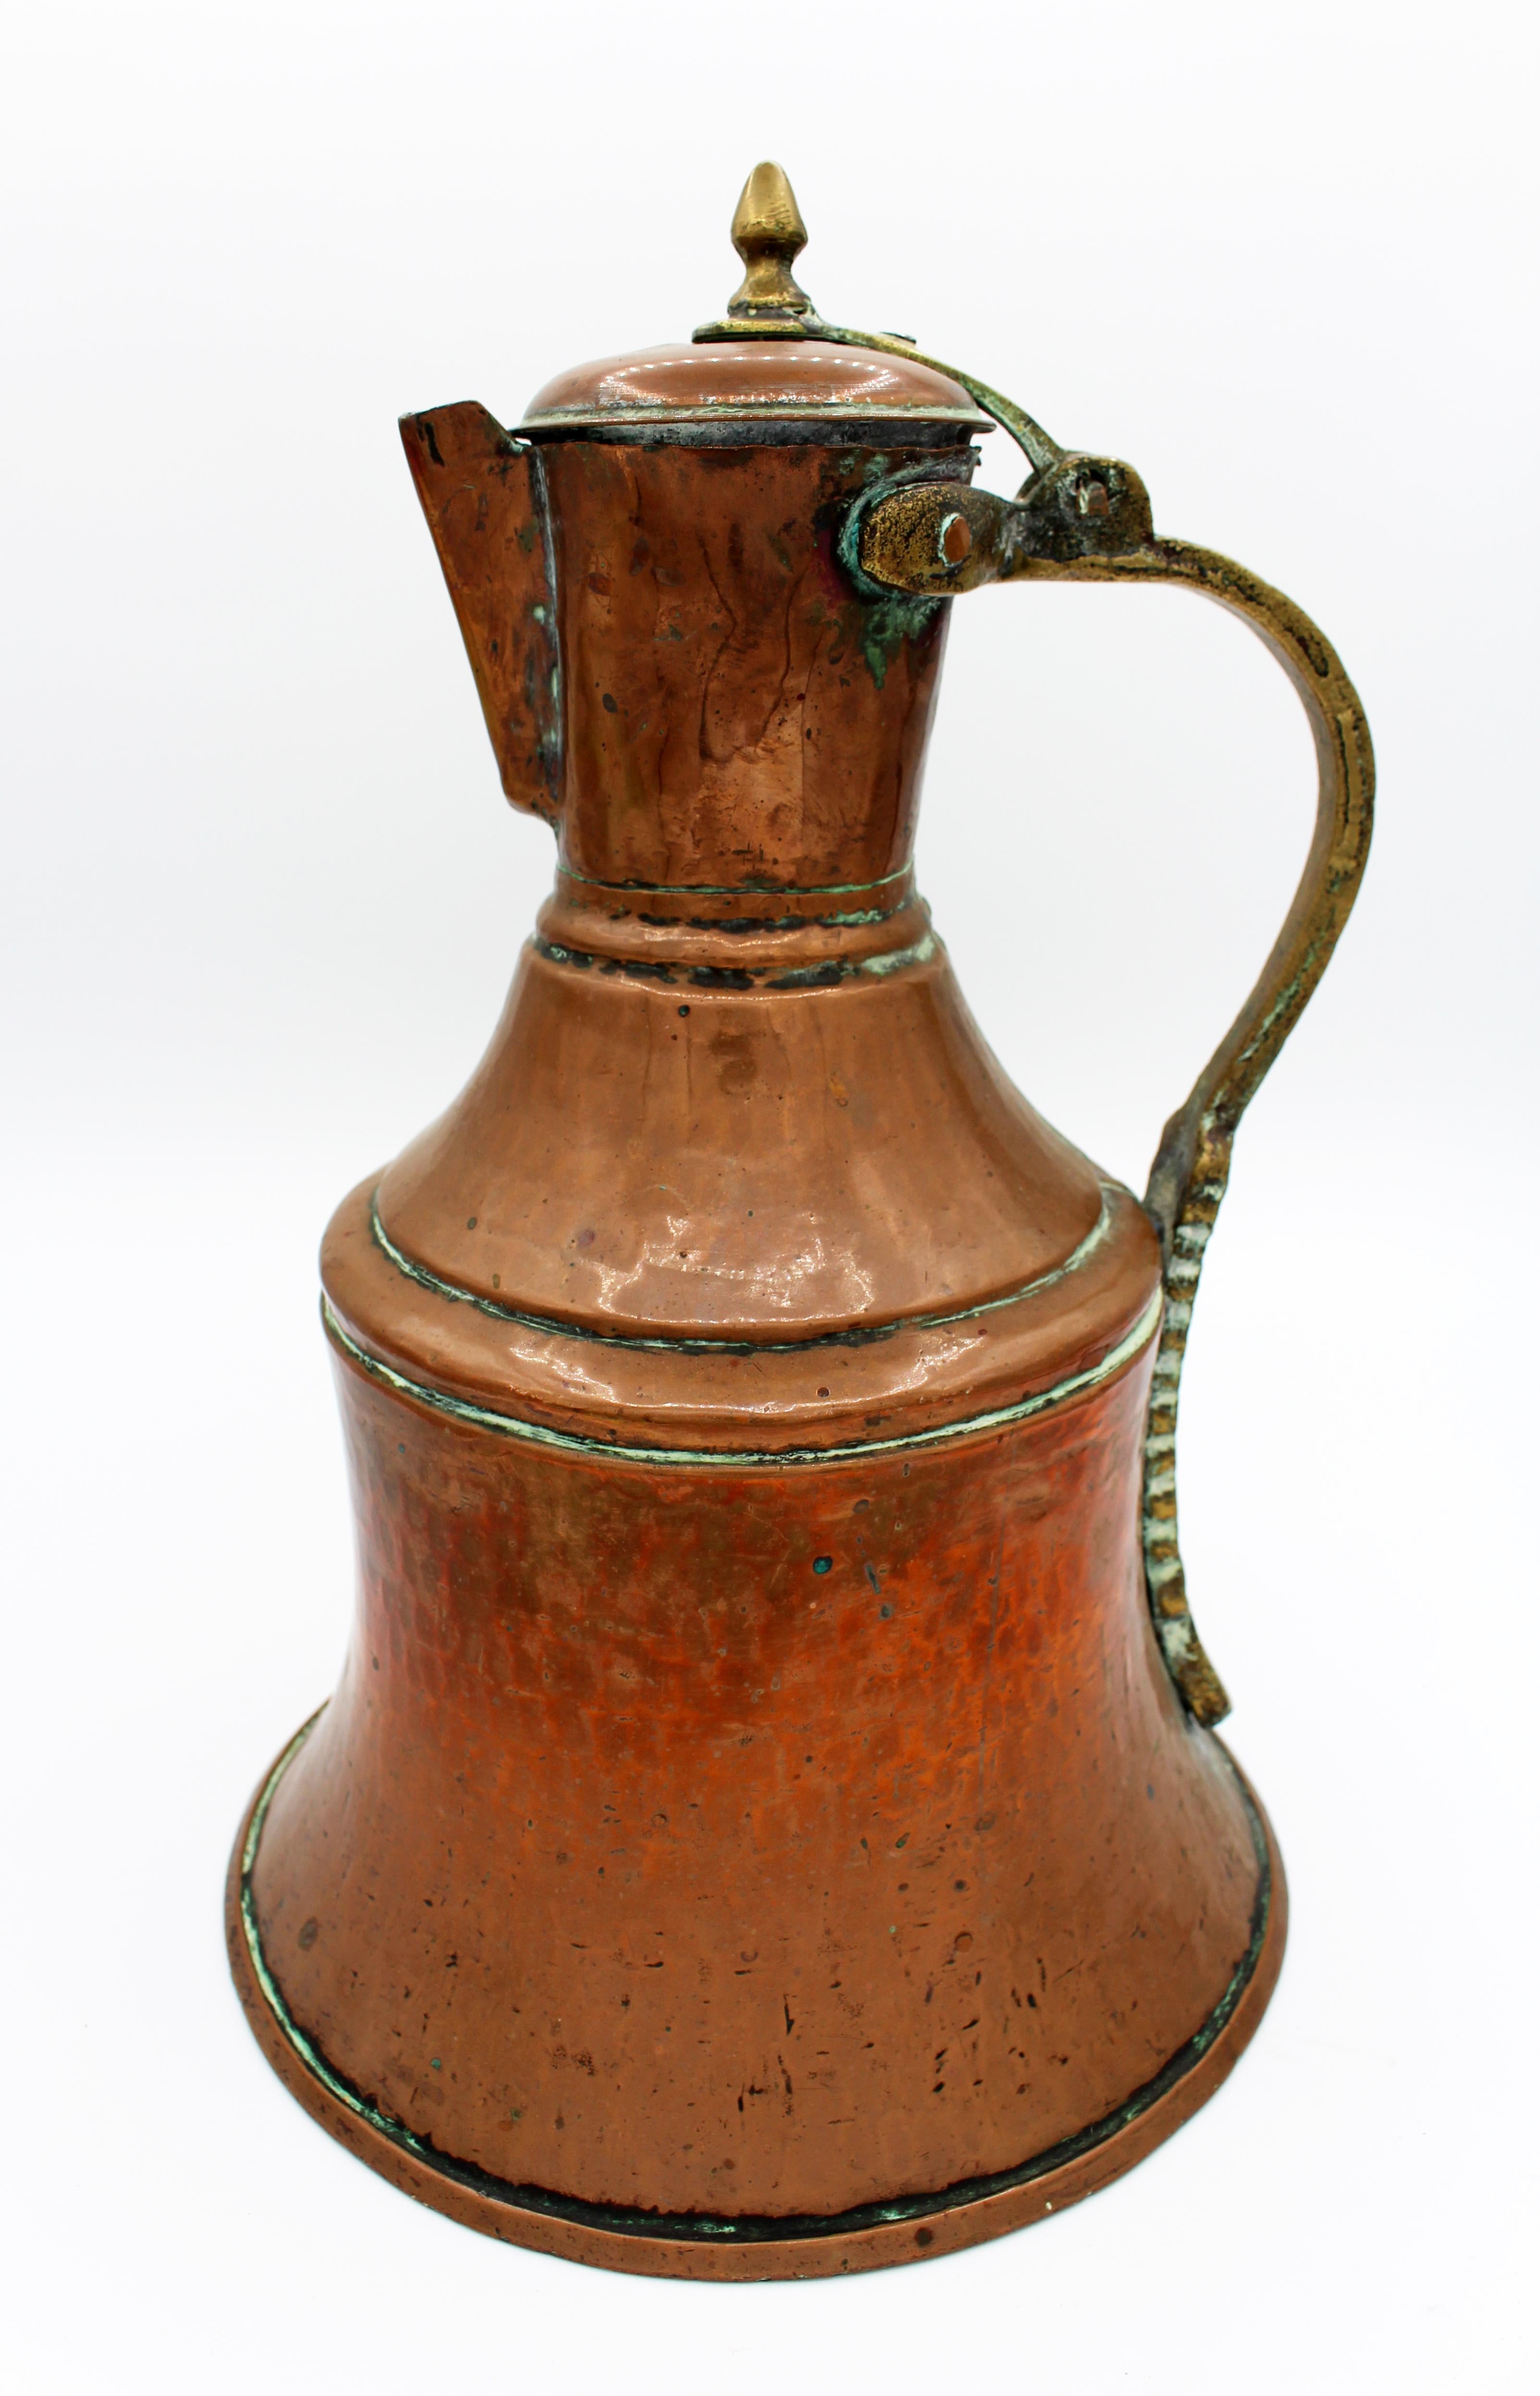 A wonderful, unusual large copper flagon. Eastern, later 19th century. Hand made with brass fittings. 13 1/2